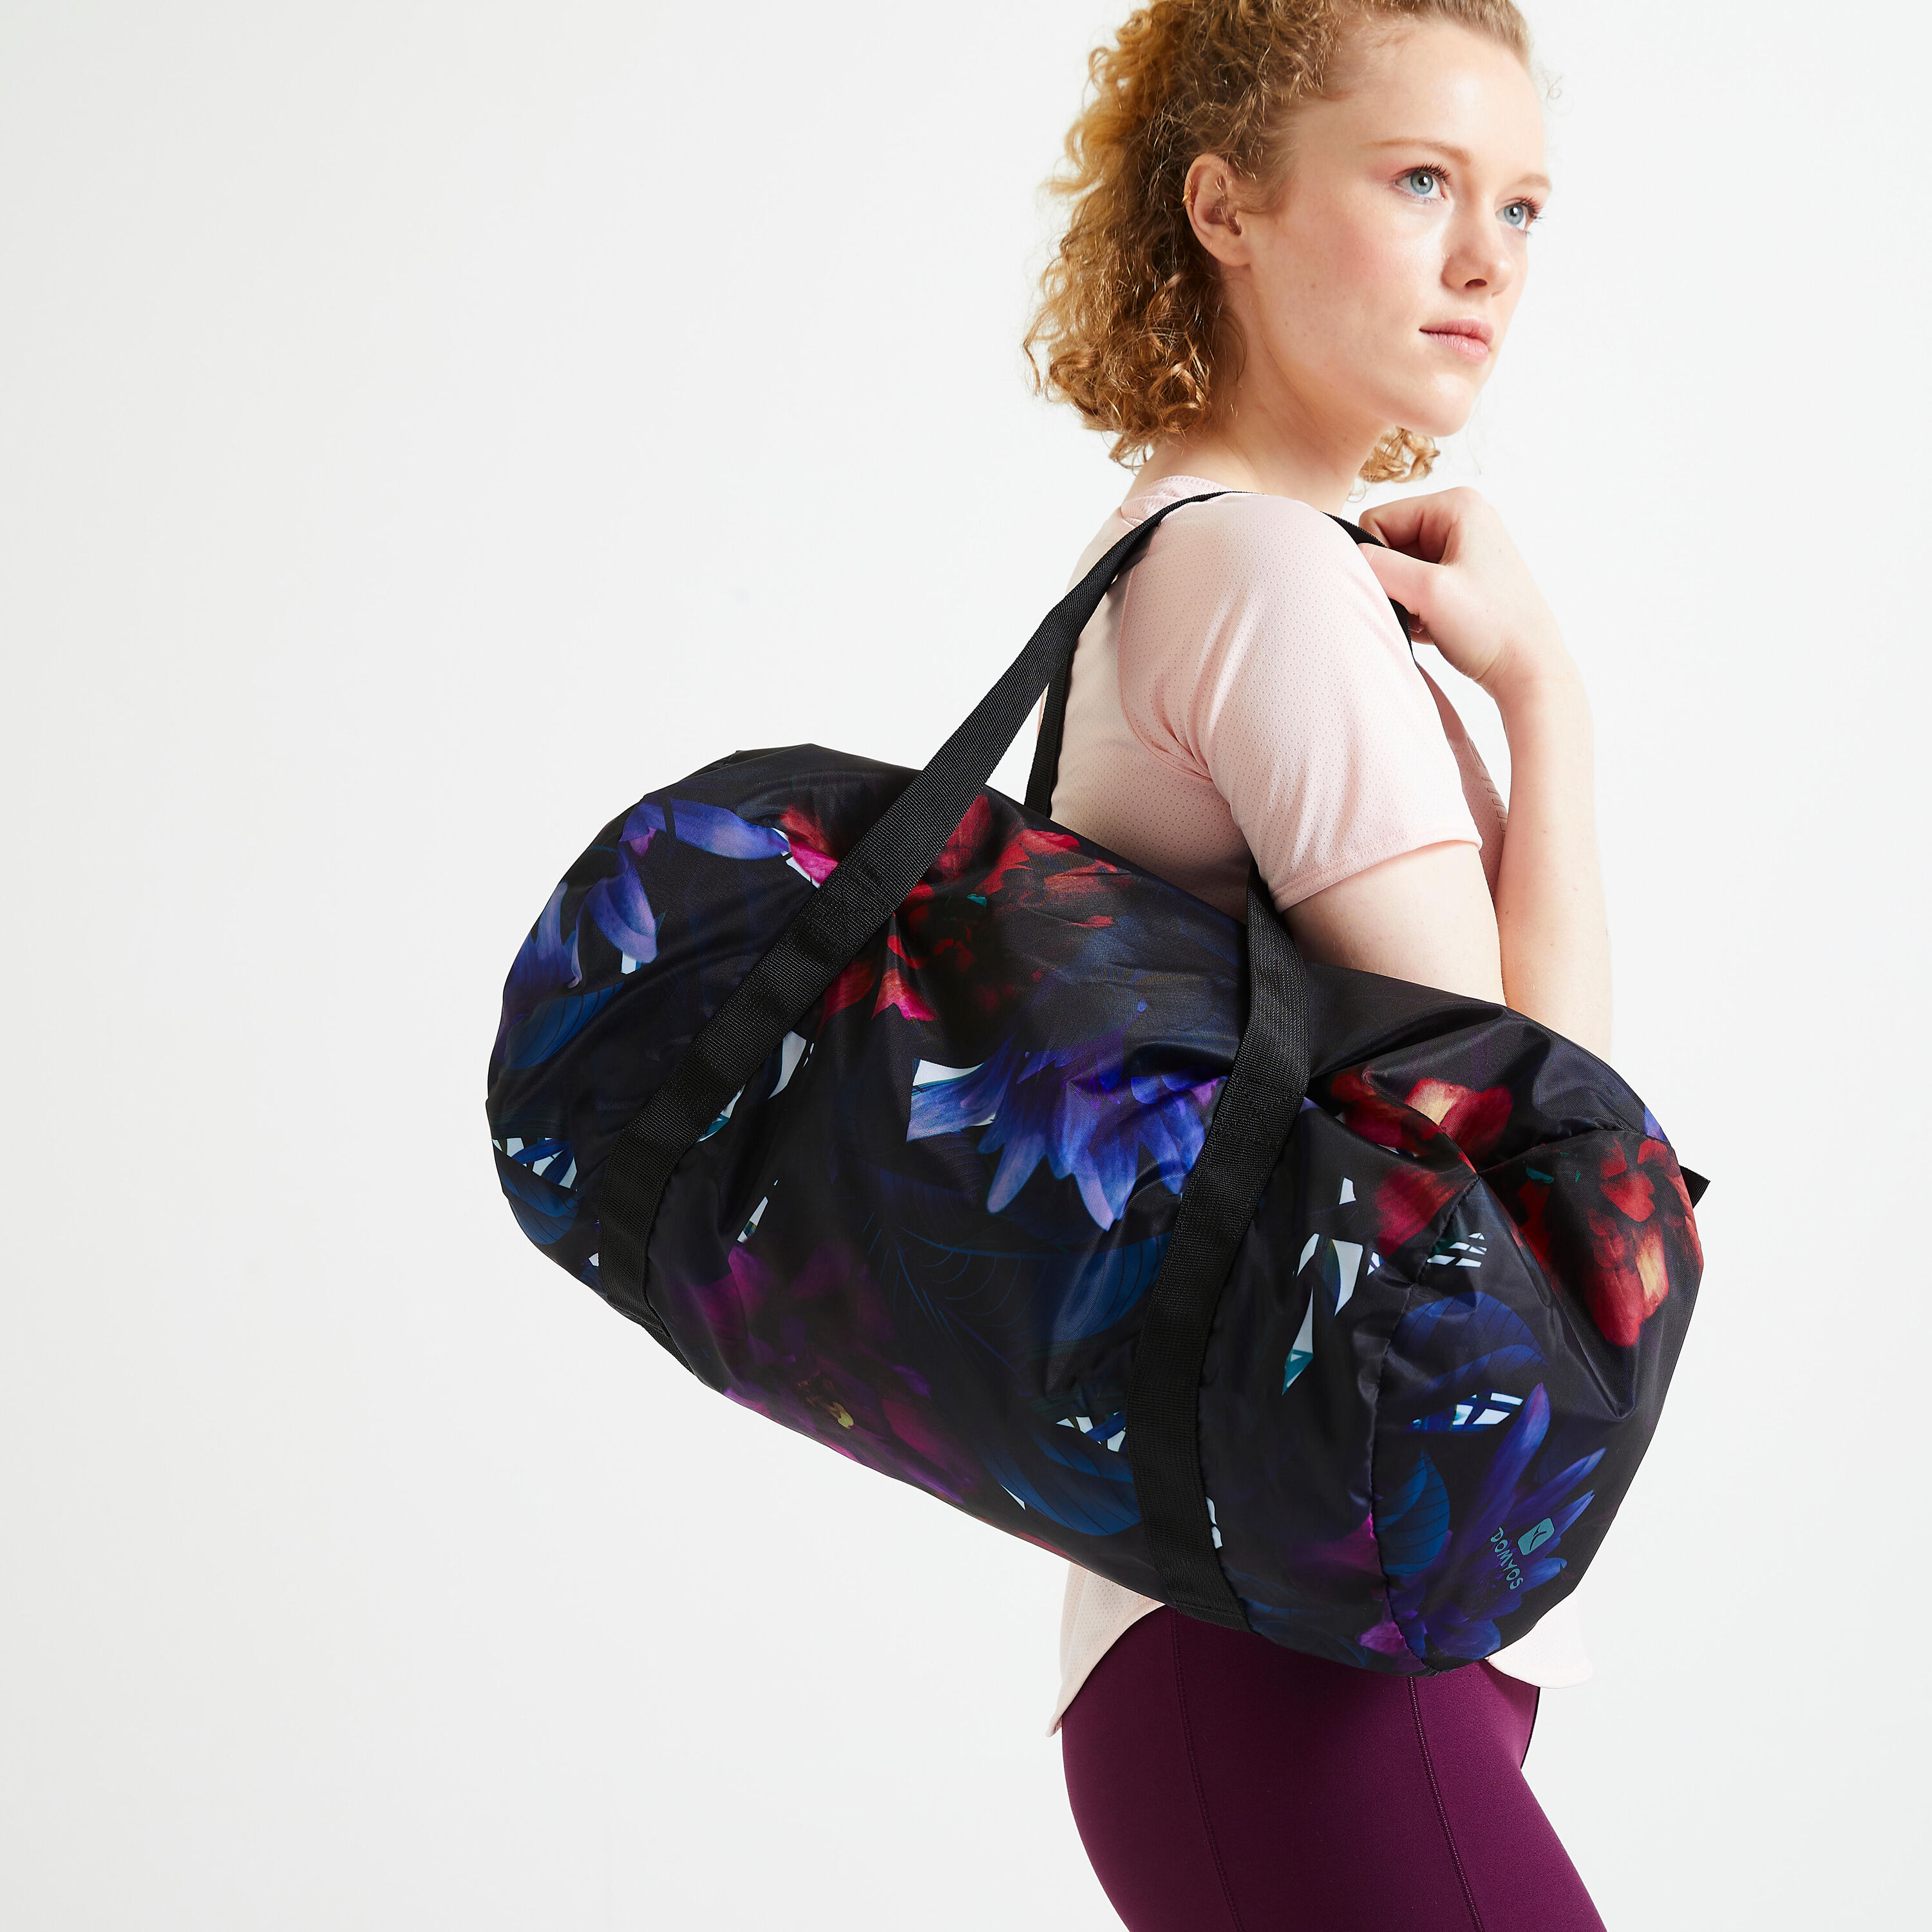 DOMYOS Fold-Down Fitness Bag 30L - Jungle Print, To Match With Our Outfits